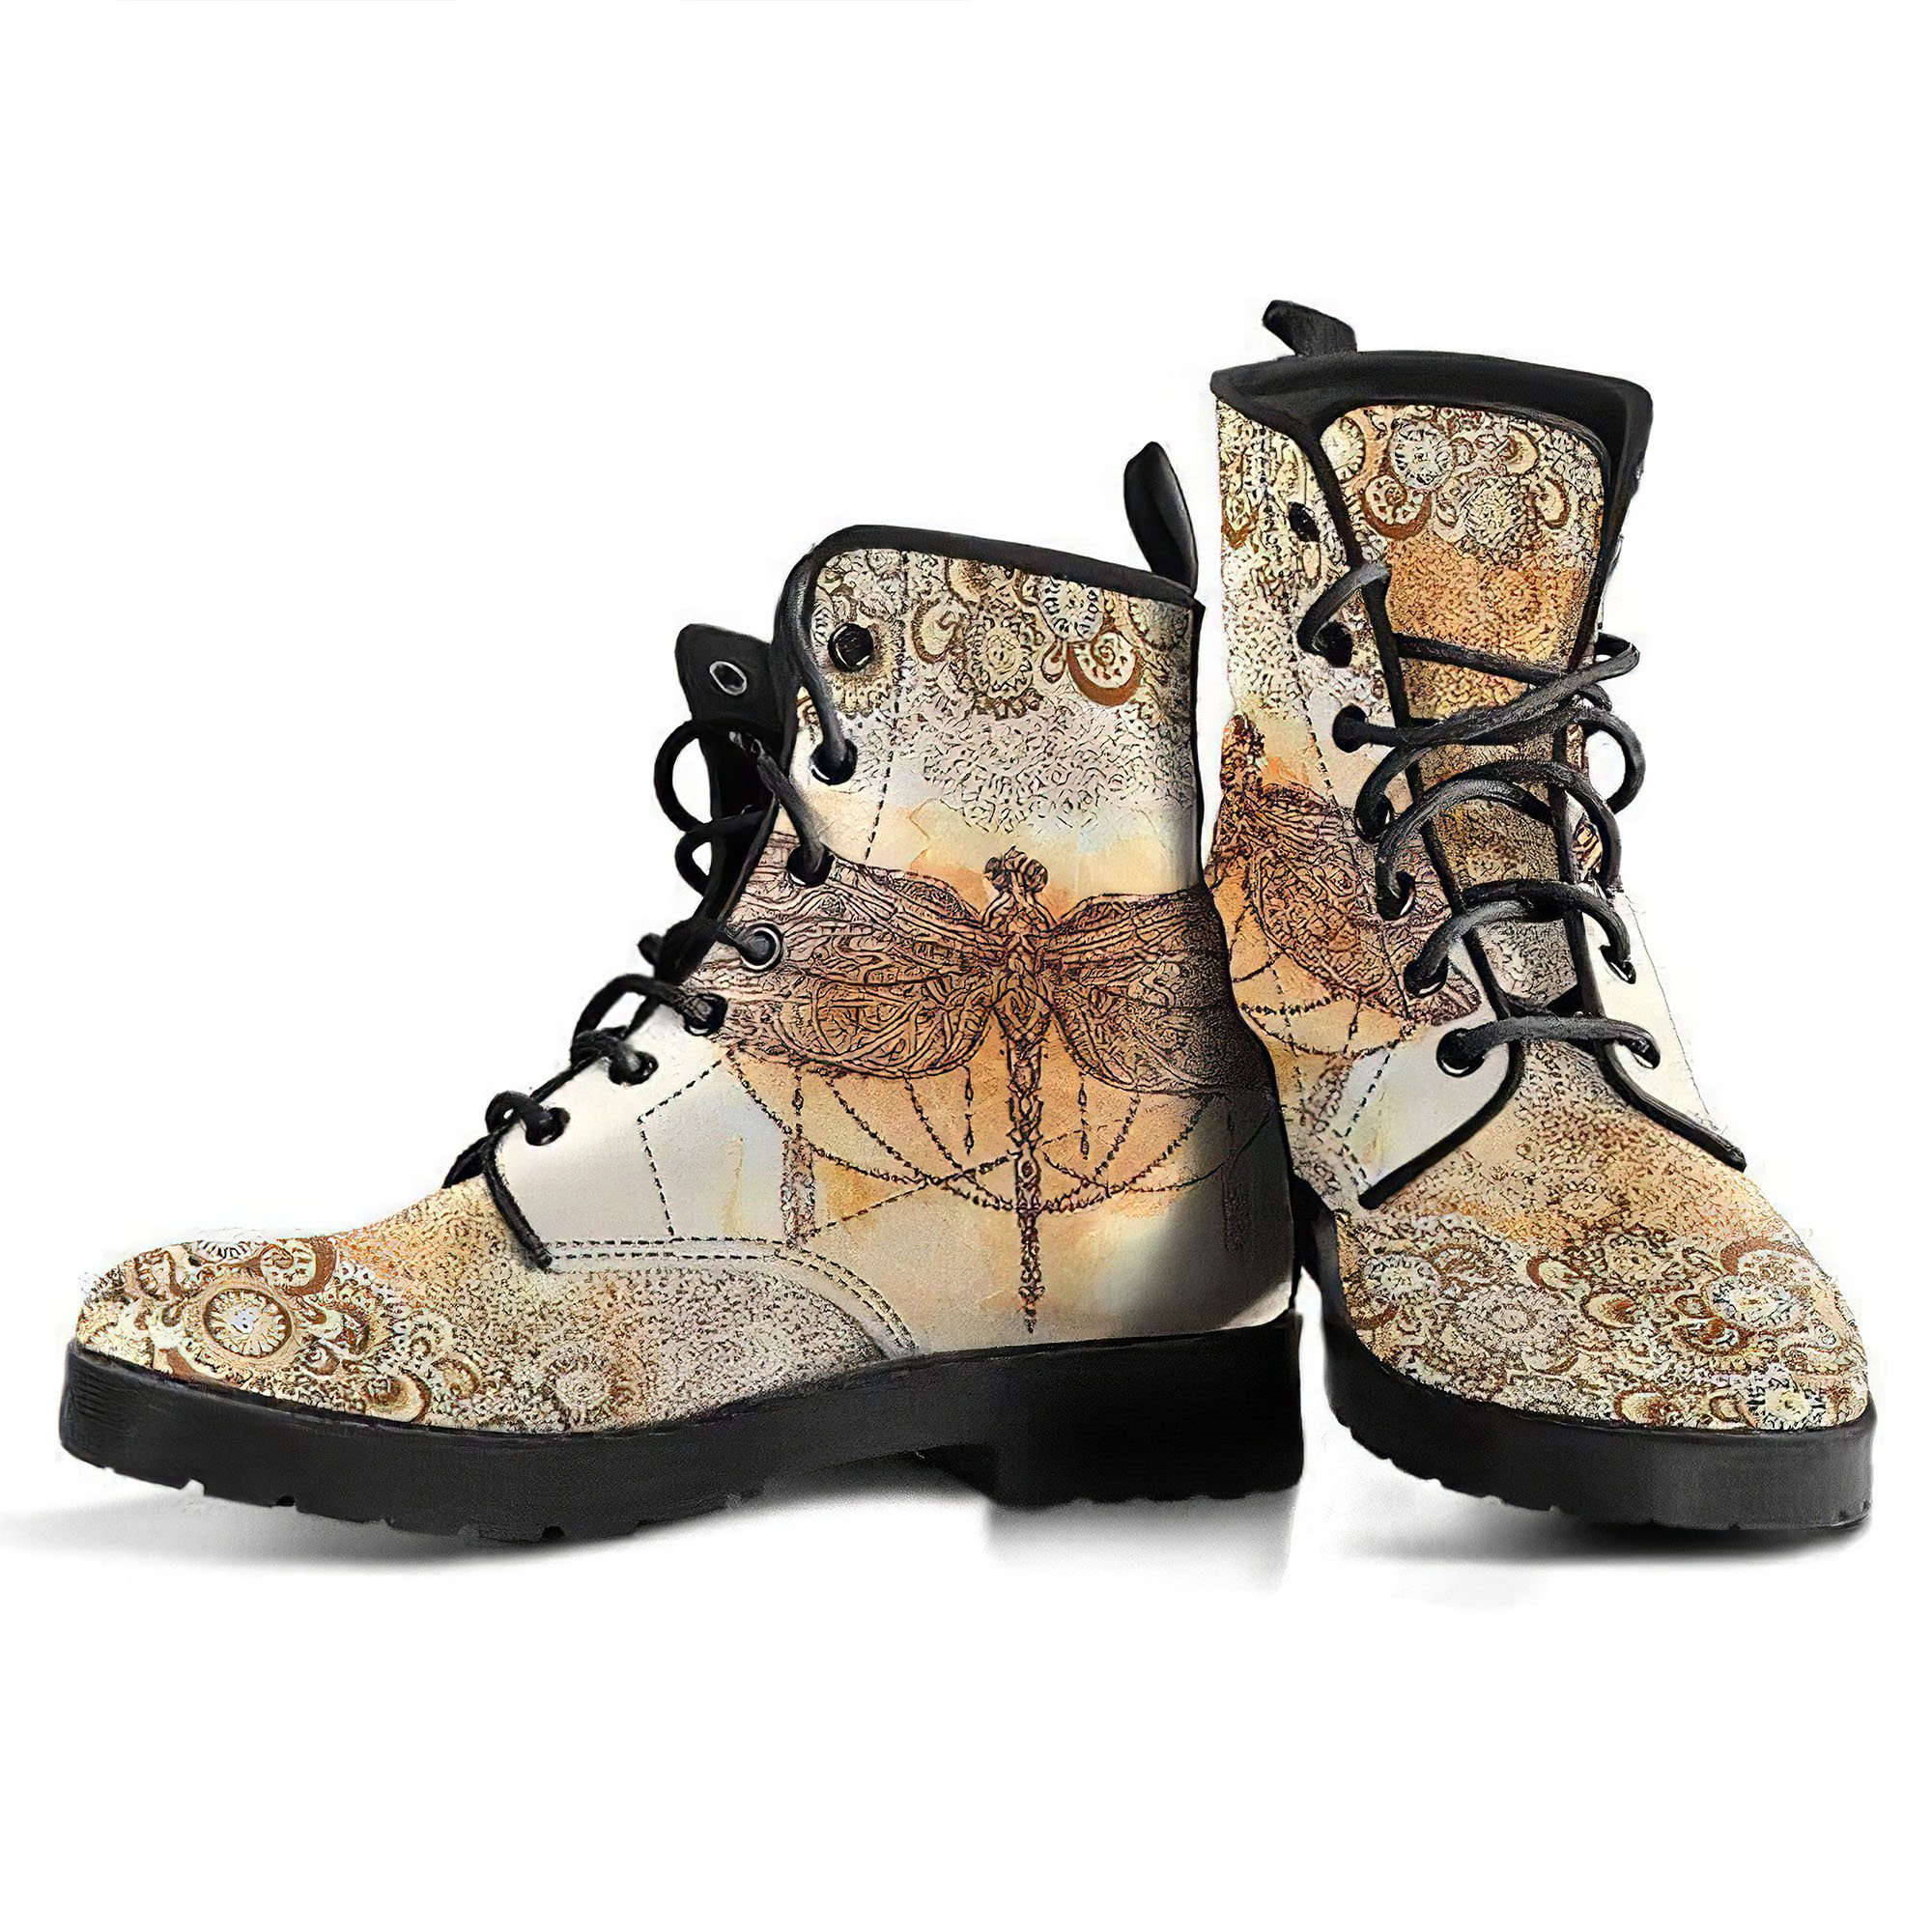 dragonfly-paisley-handcrafted-boots-gp-main.jpg